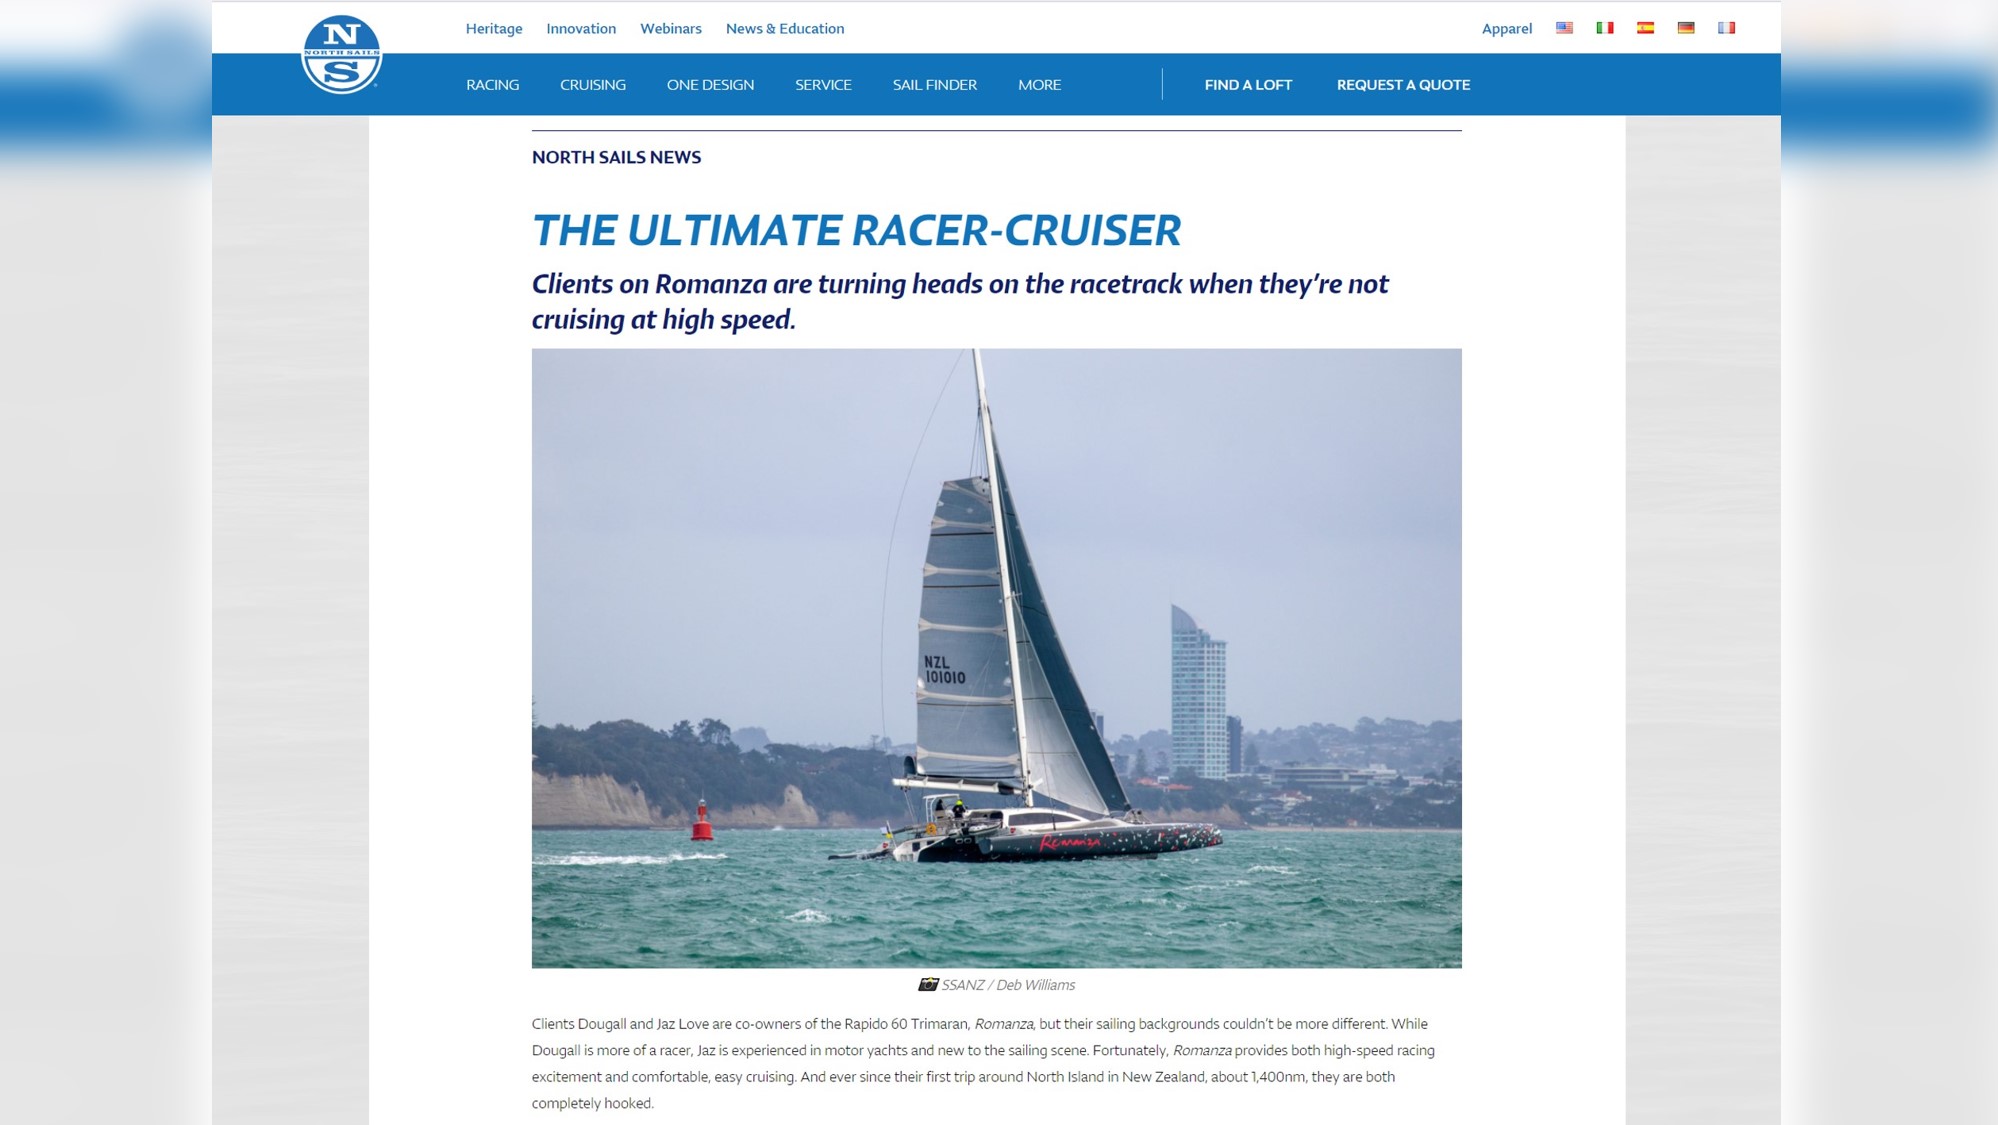 The Ultimate Racer-Cruiser, reports North Sails